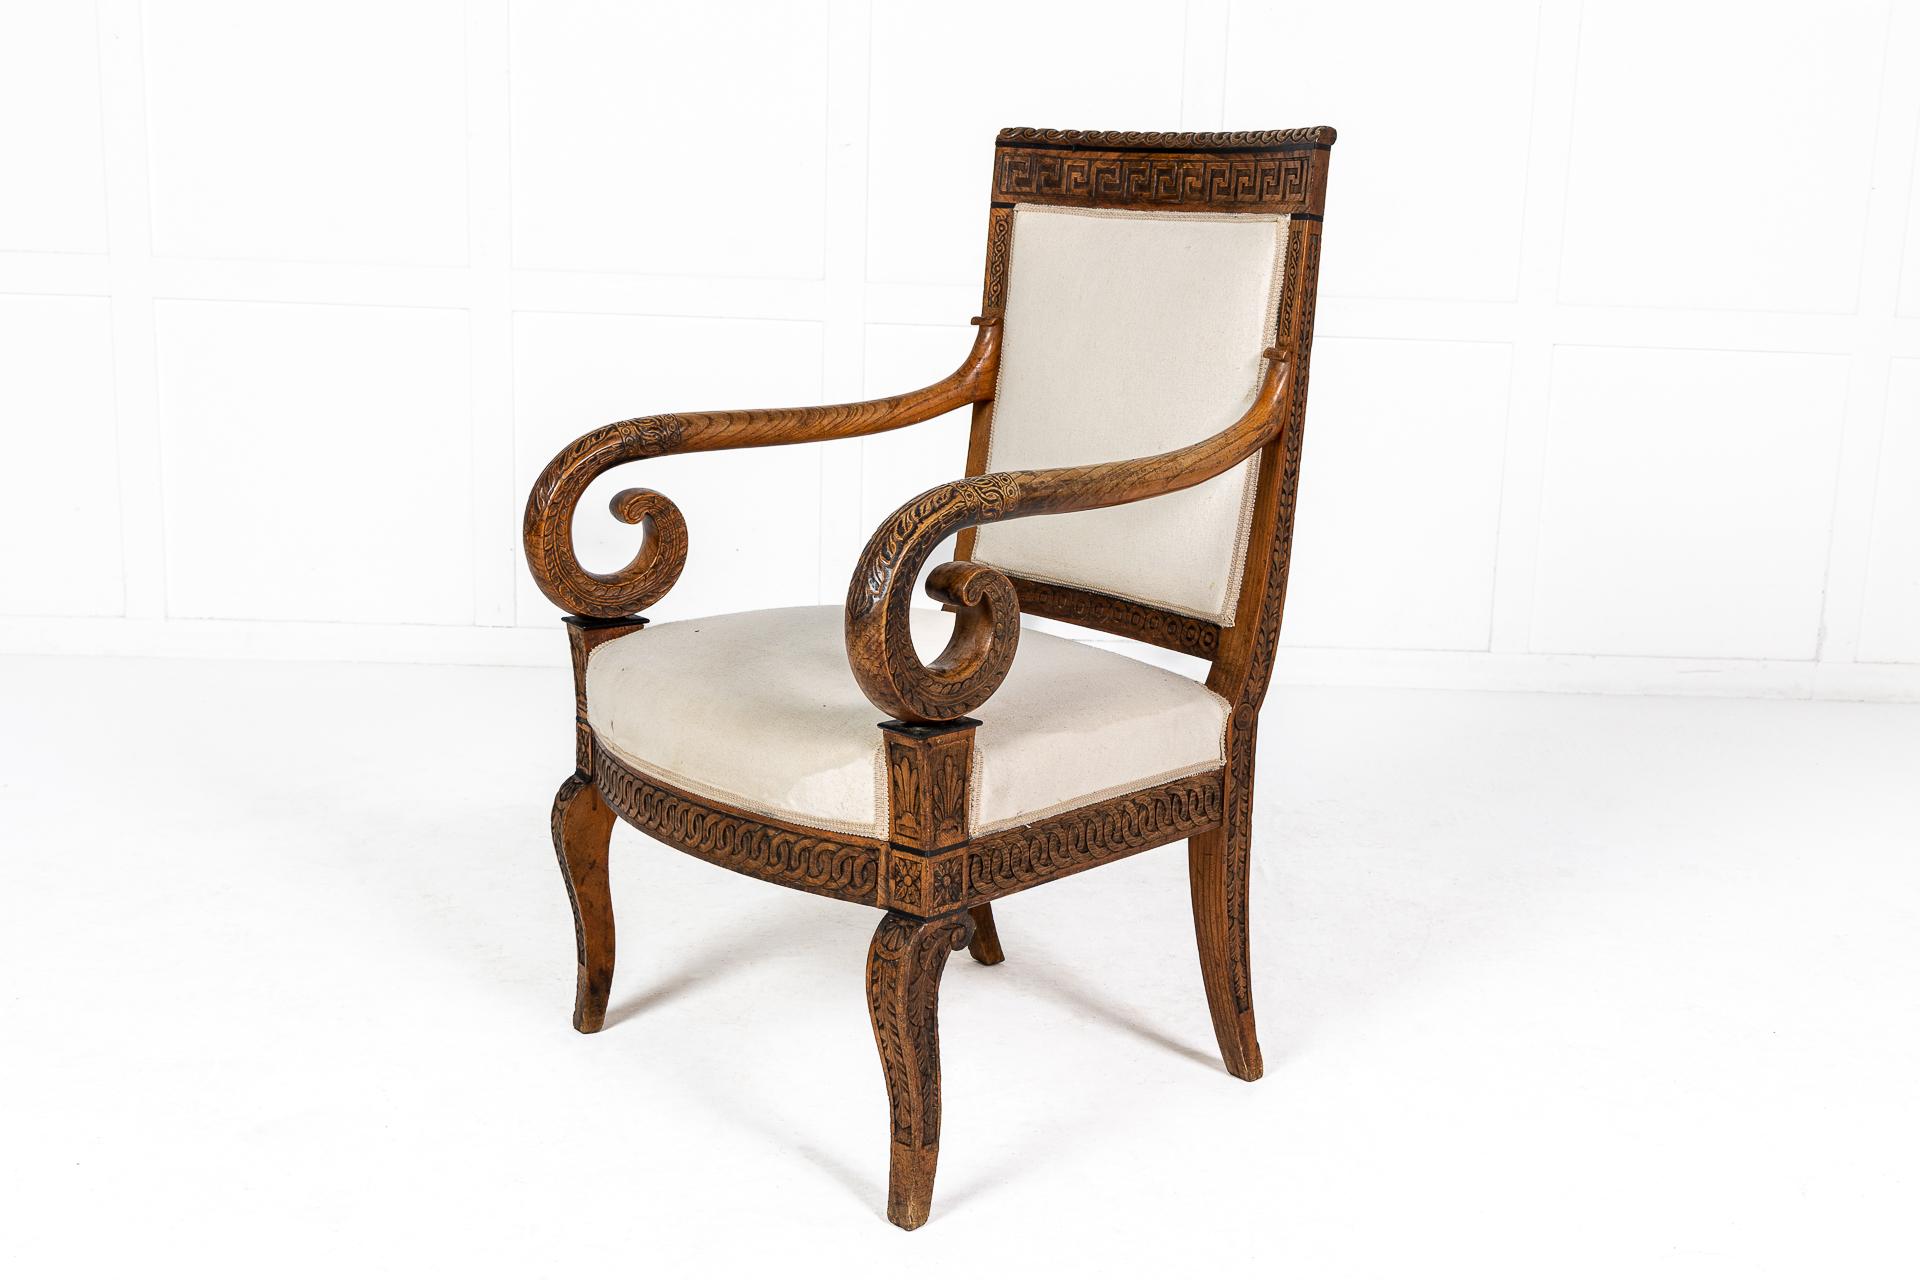 Matched Pair of 19th Century French Carved Wood Chairs For Sale 5